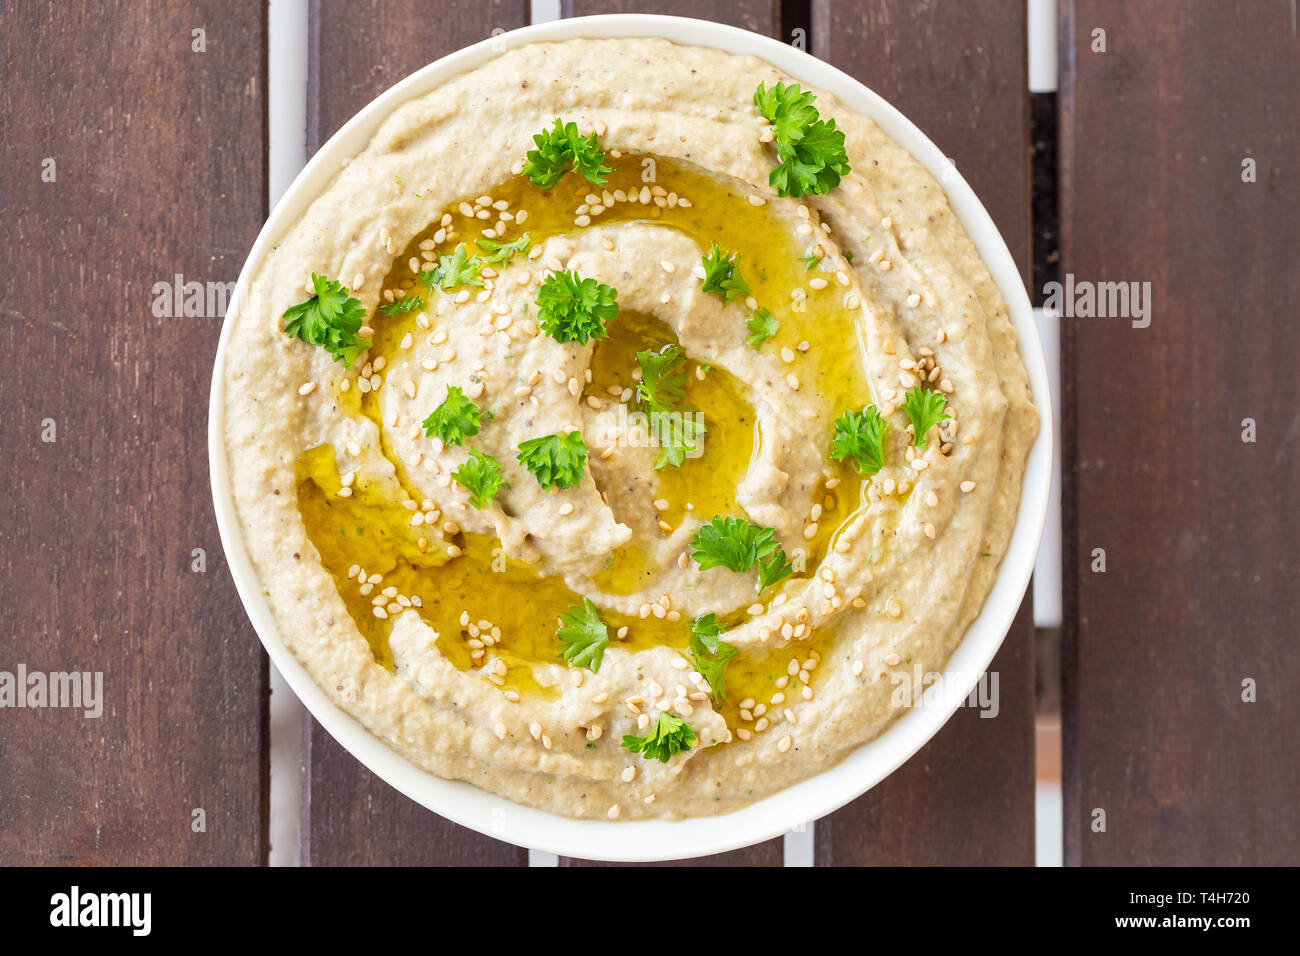 Vegan baba ghanoush, a levantine appetizer of mashed cooked eggplant mixed with tahini, olive oil, and various seasonings Stock Photo